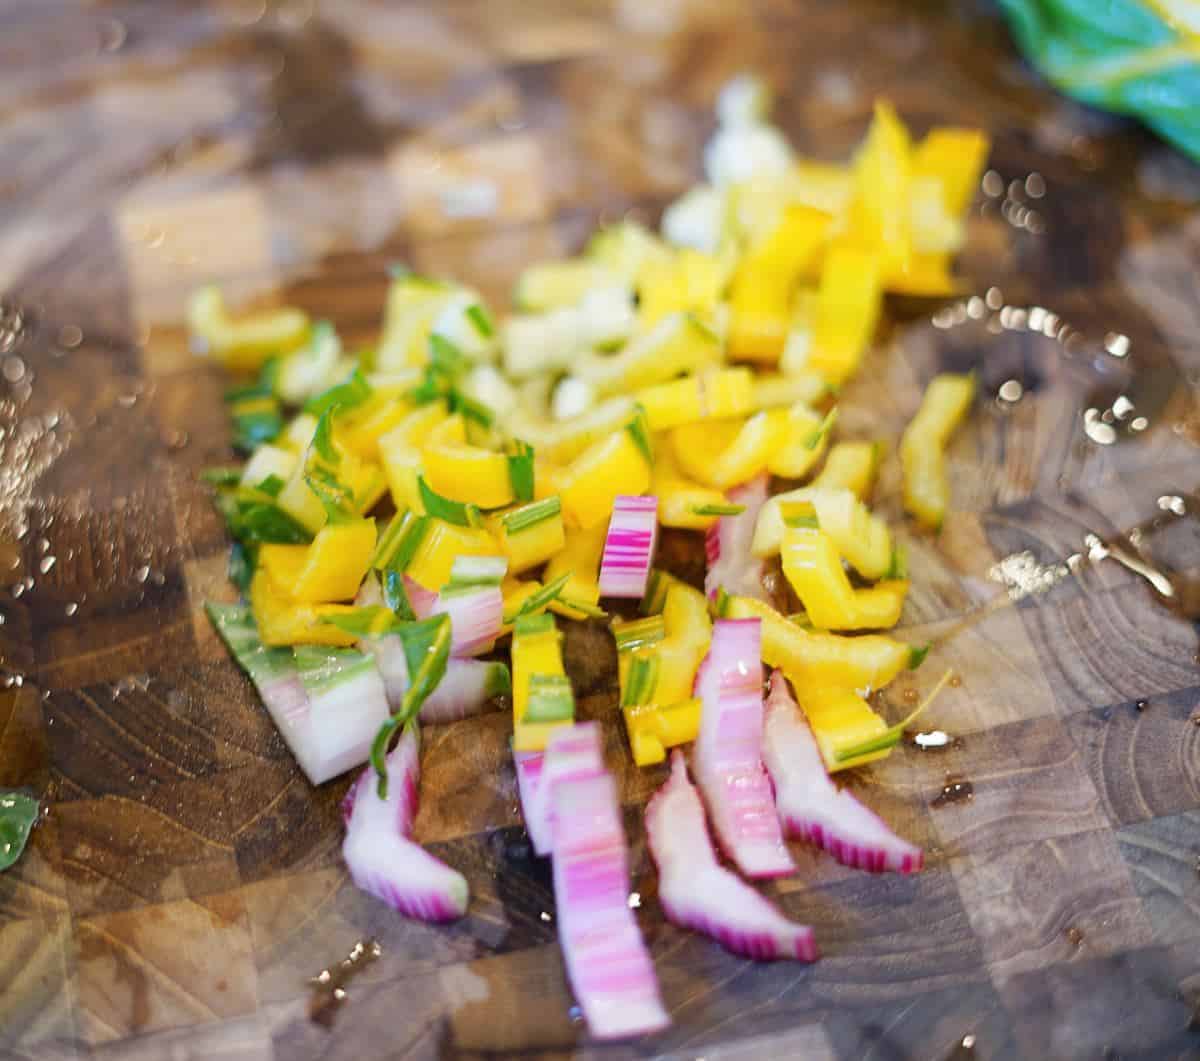 Yellow and pink diced rainbow chard stems on a wooden cutting board.